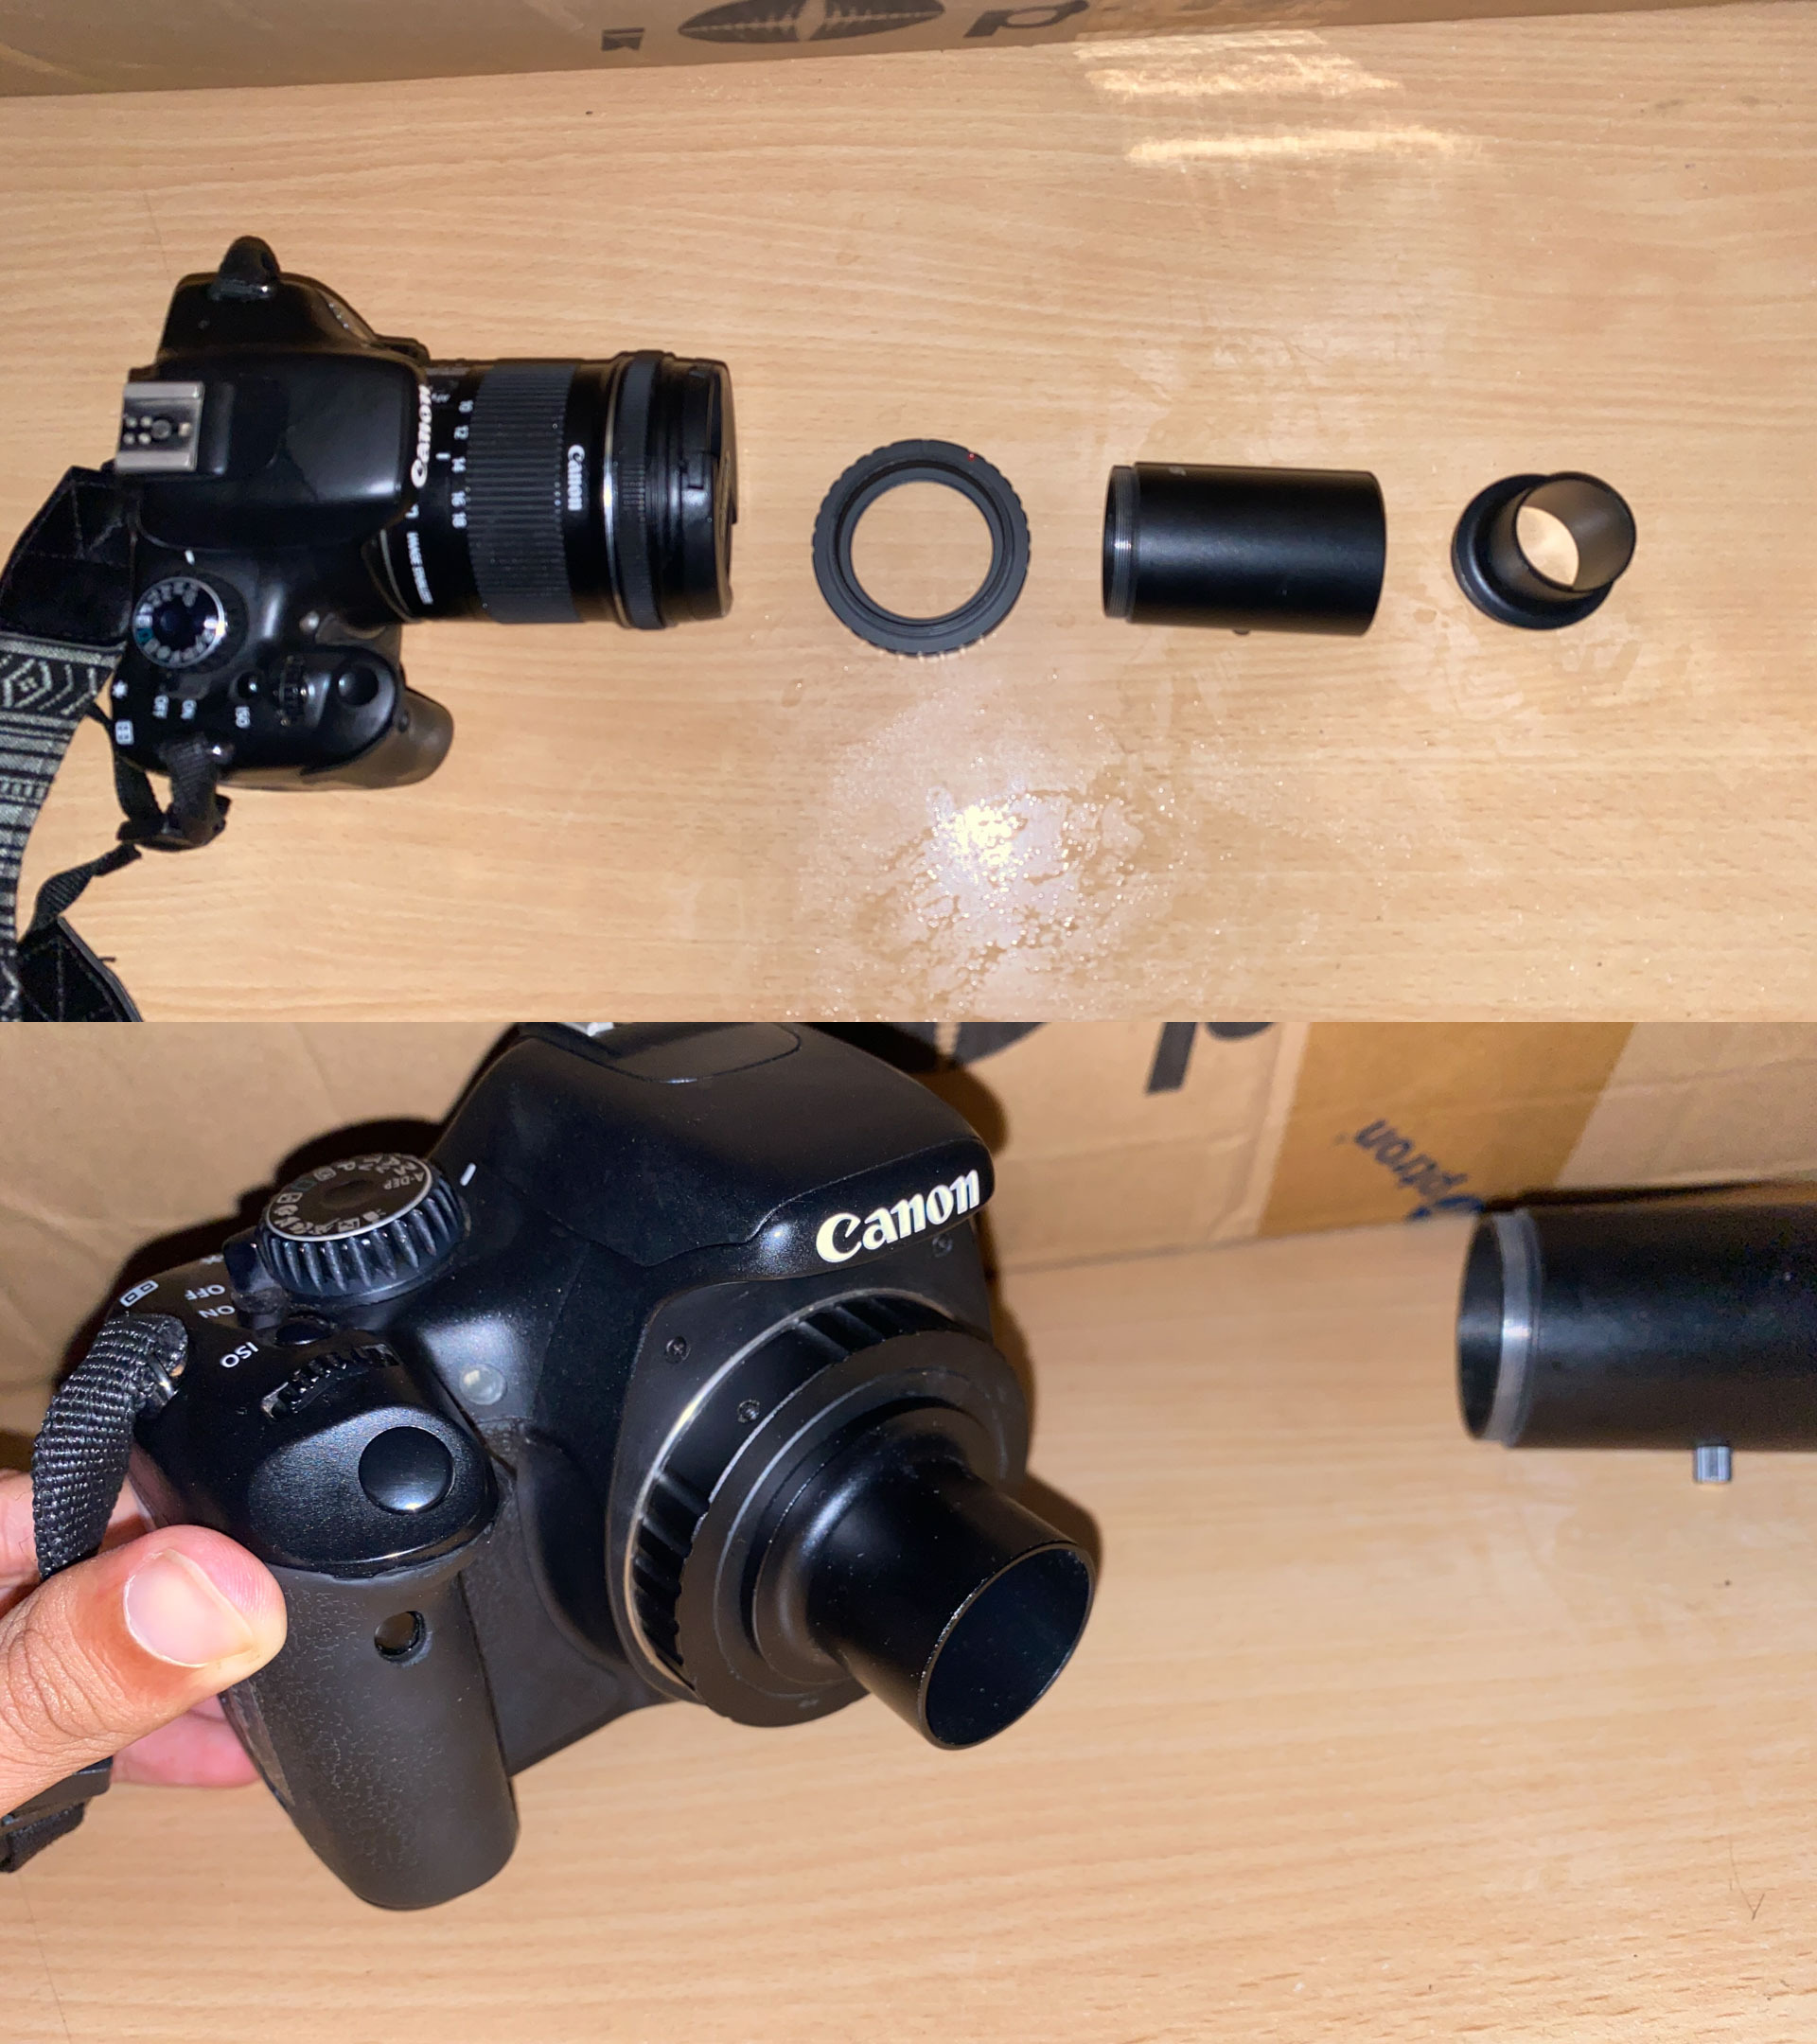 DSLR, T-Ring and Adapter Connections